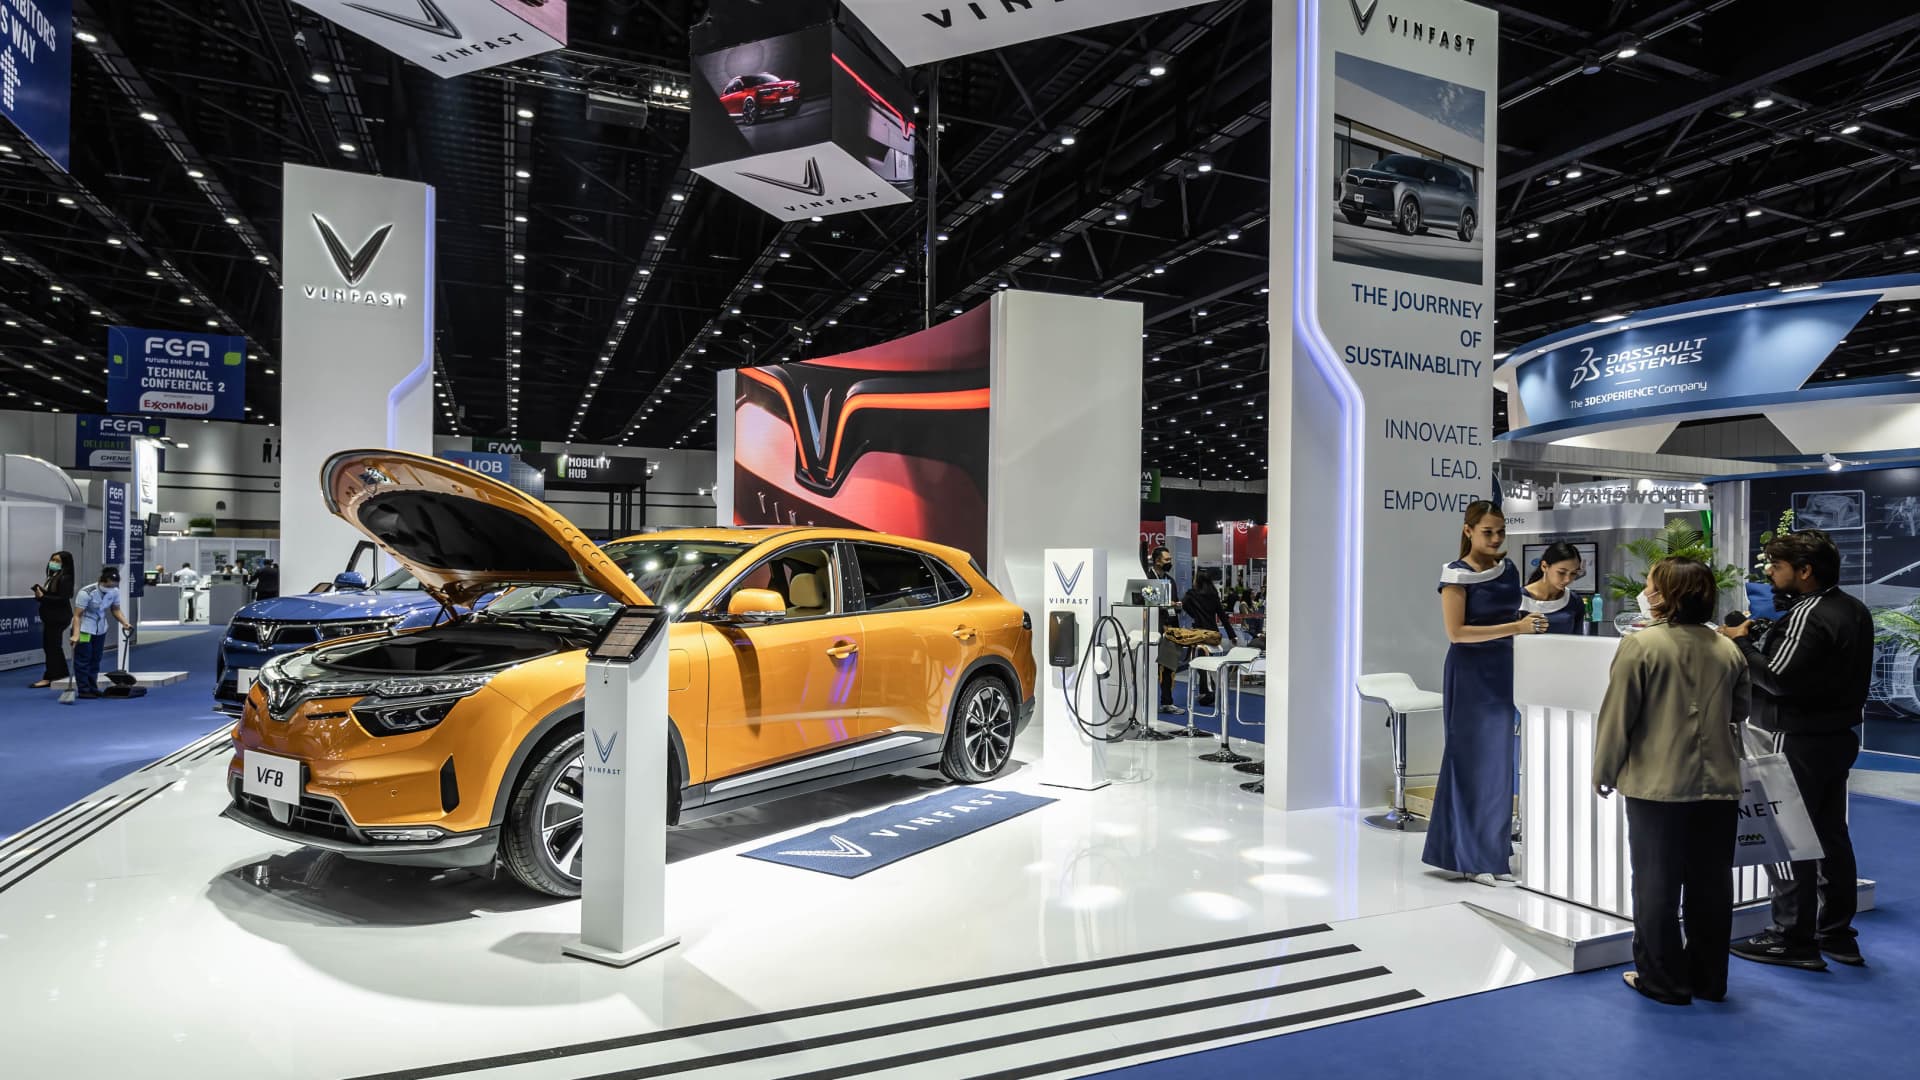 Vietnamese EV maker VinFast is now price extra than Ford and GM after Nasdaq debut